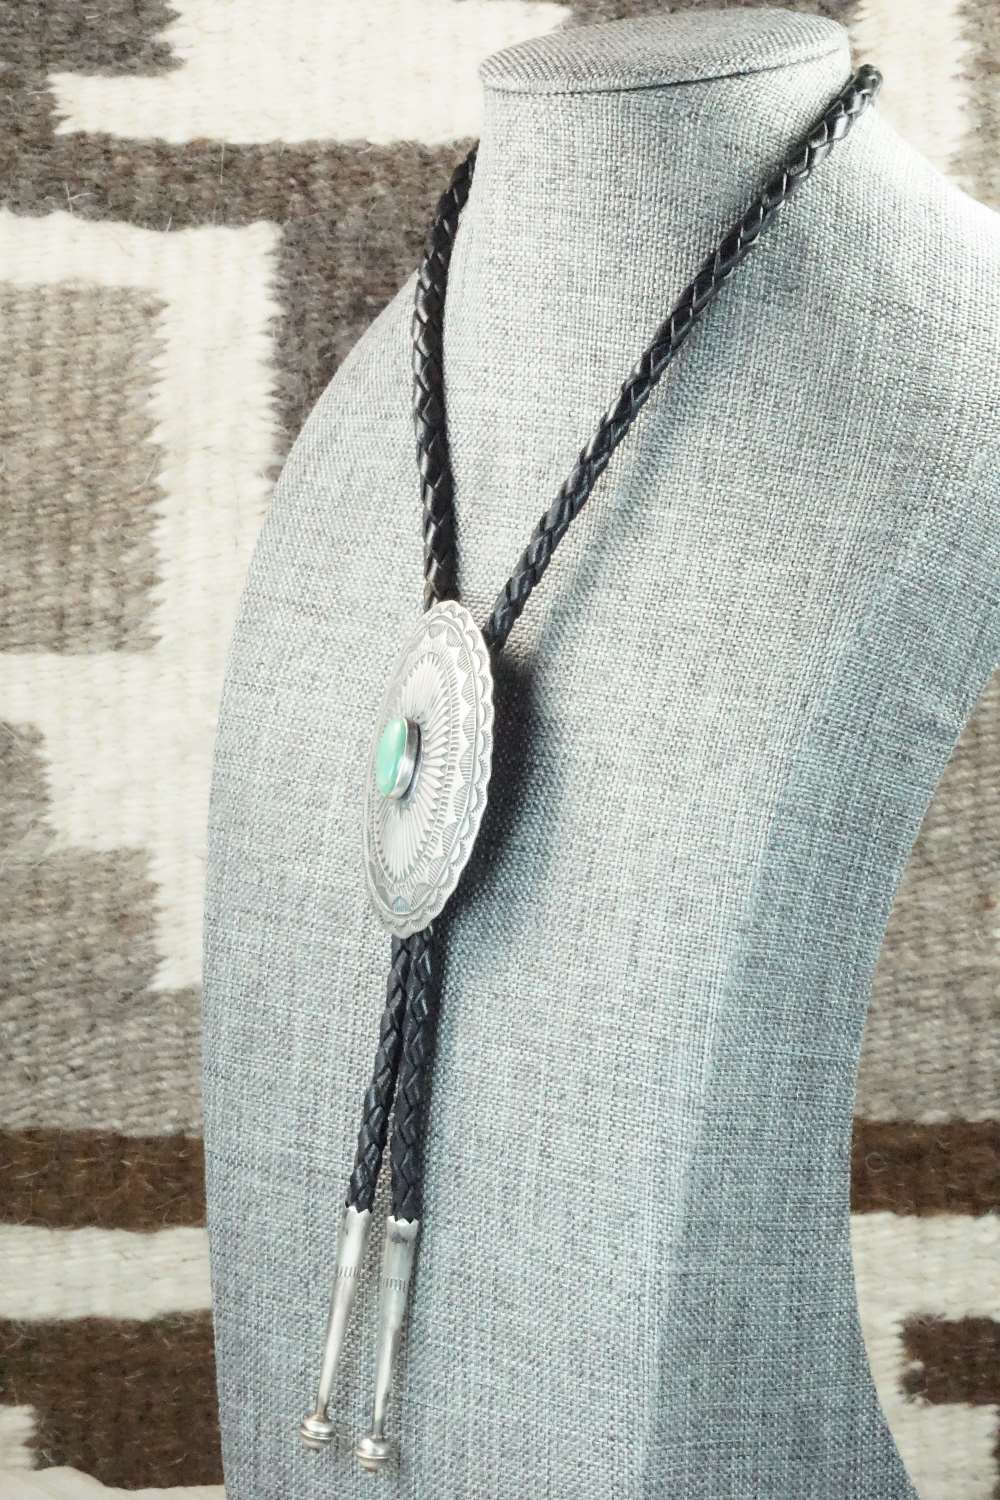 Turquoise & Sterling Silver Bolo Tie - Arnold Blackgoat